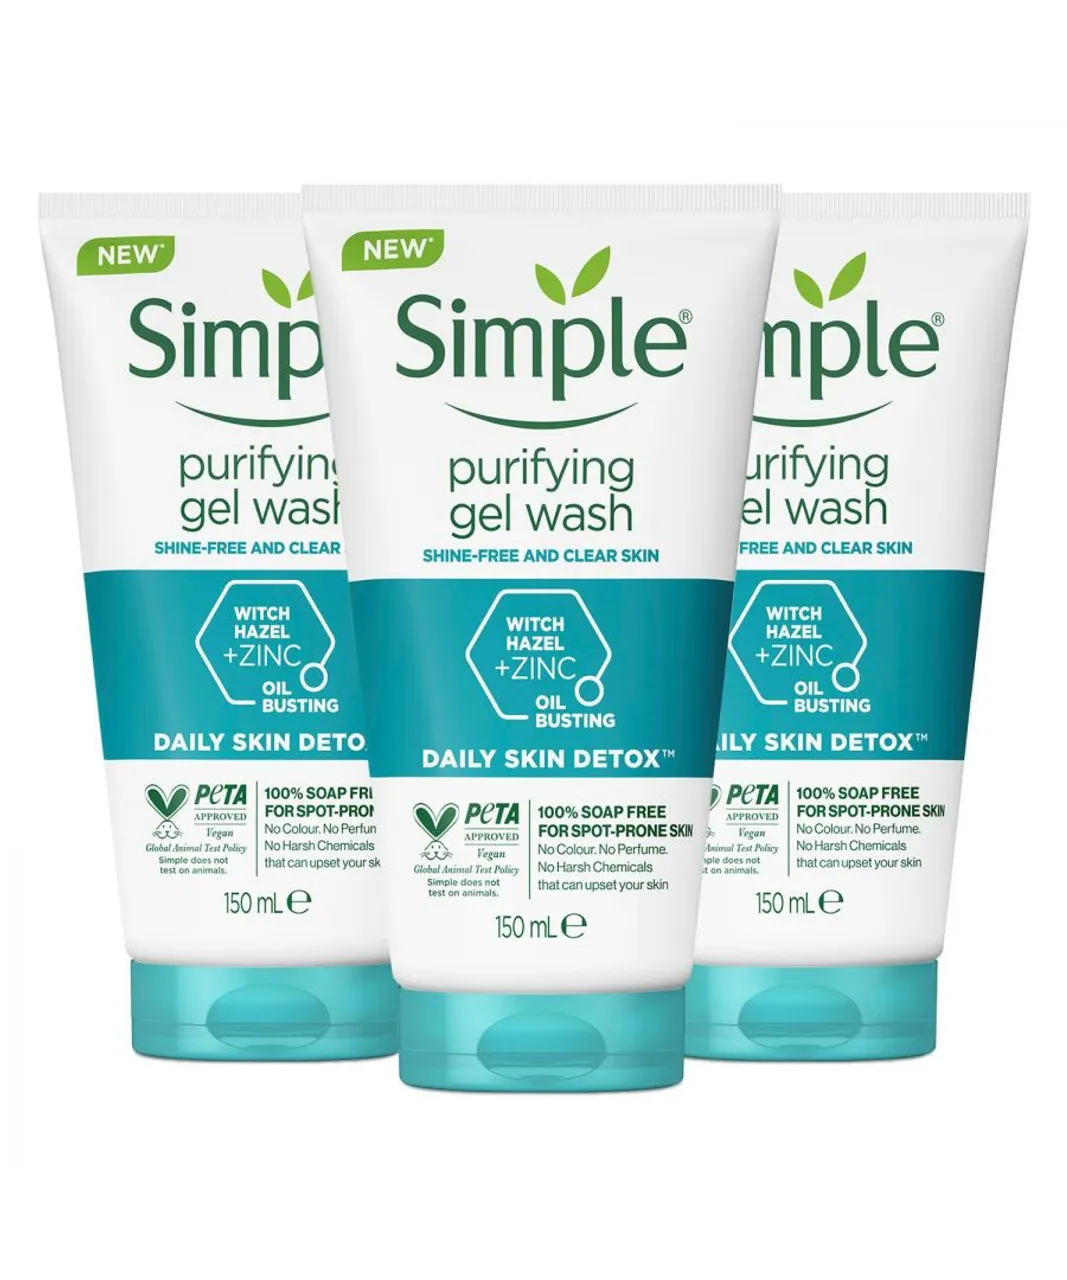 Simple Daily Skin Detox Purifying Face Wash, 150ml, 3 pack - NA - One Size